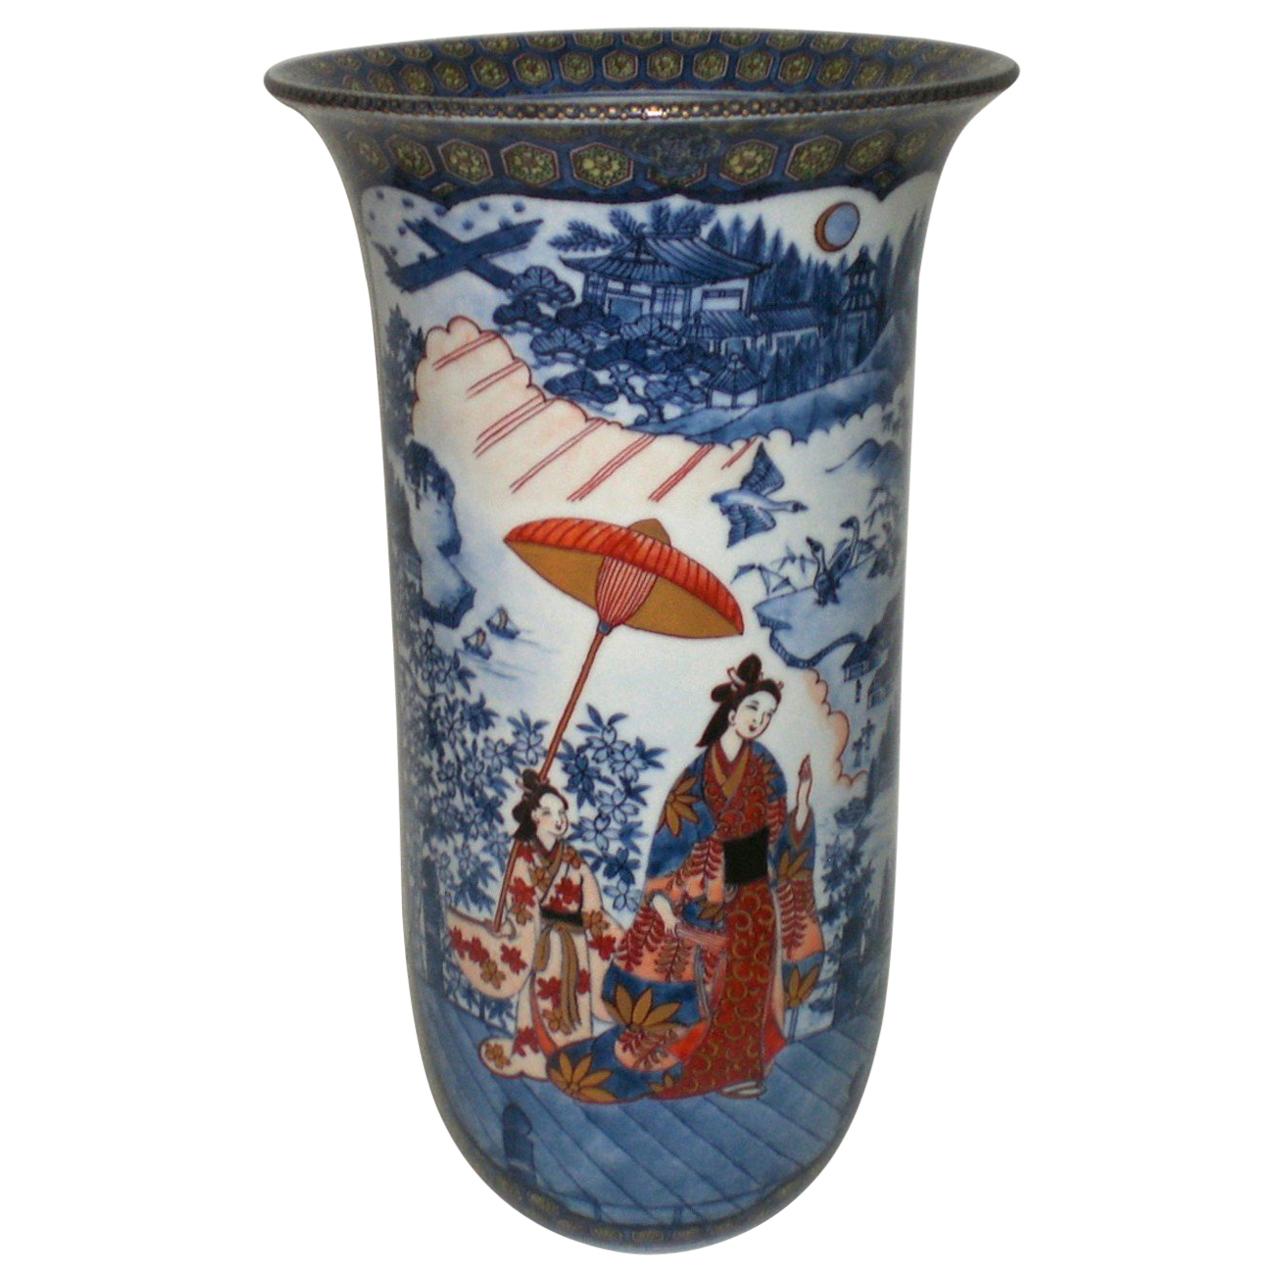 Japanese Contemporary Large Red Blue Green Porcelain Vase by Master Artist